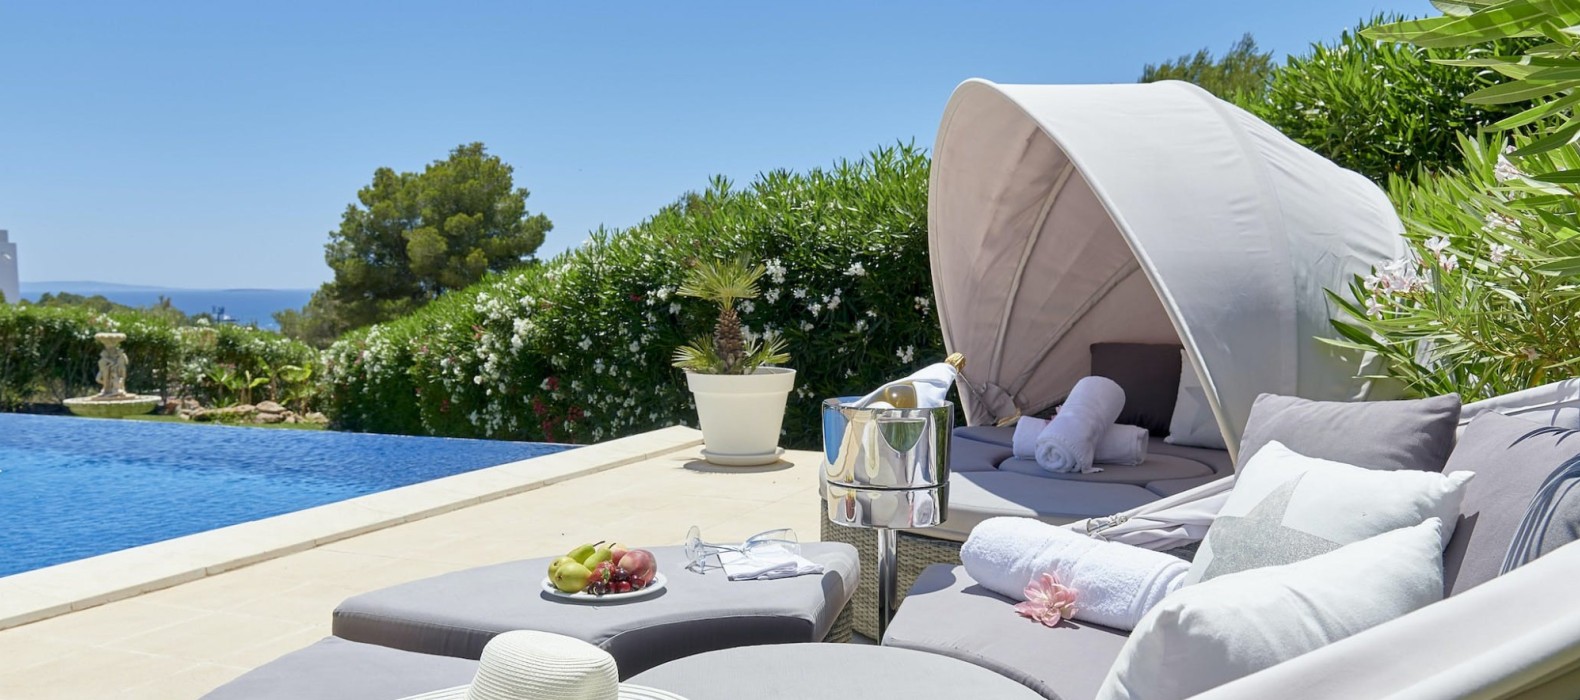 Daybeds next to the pool of Villa Riva Alto in Ibiza